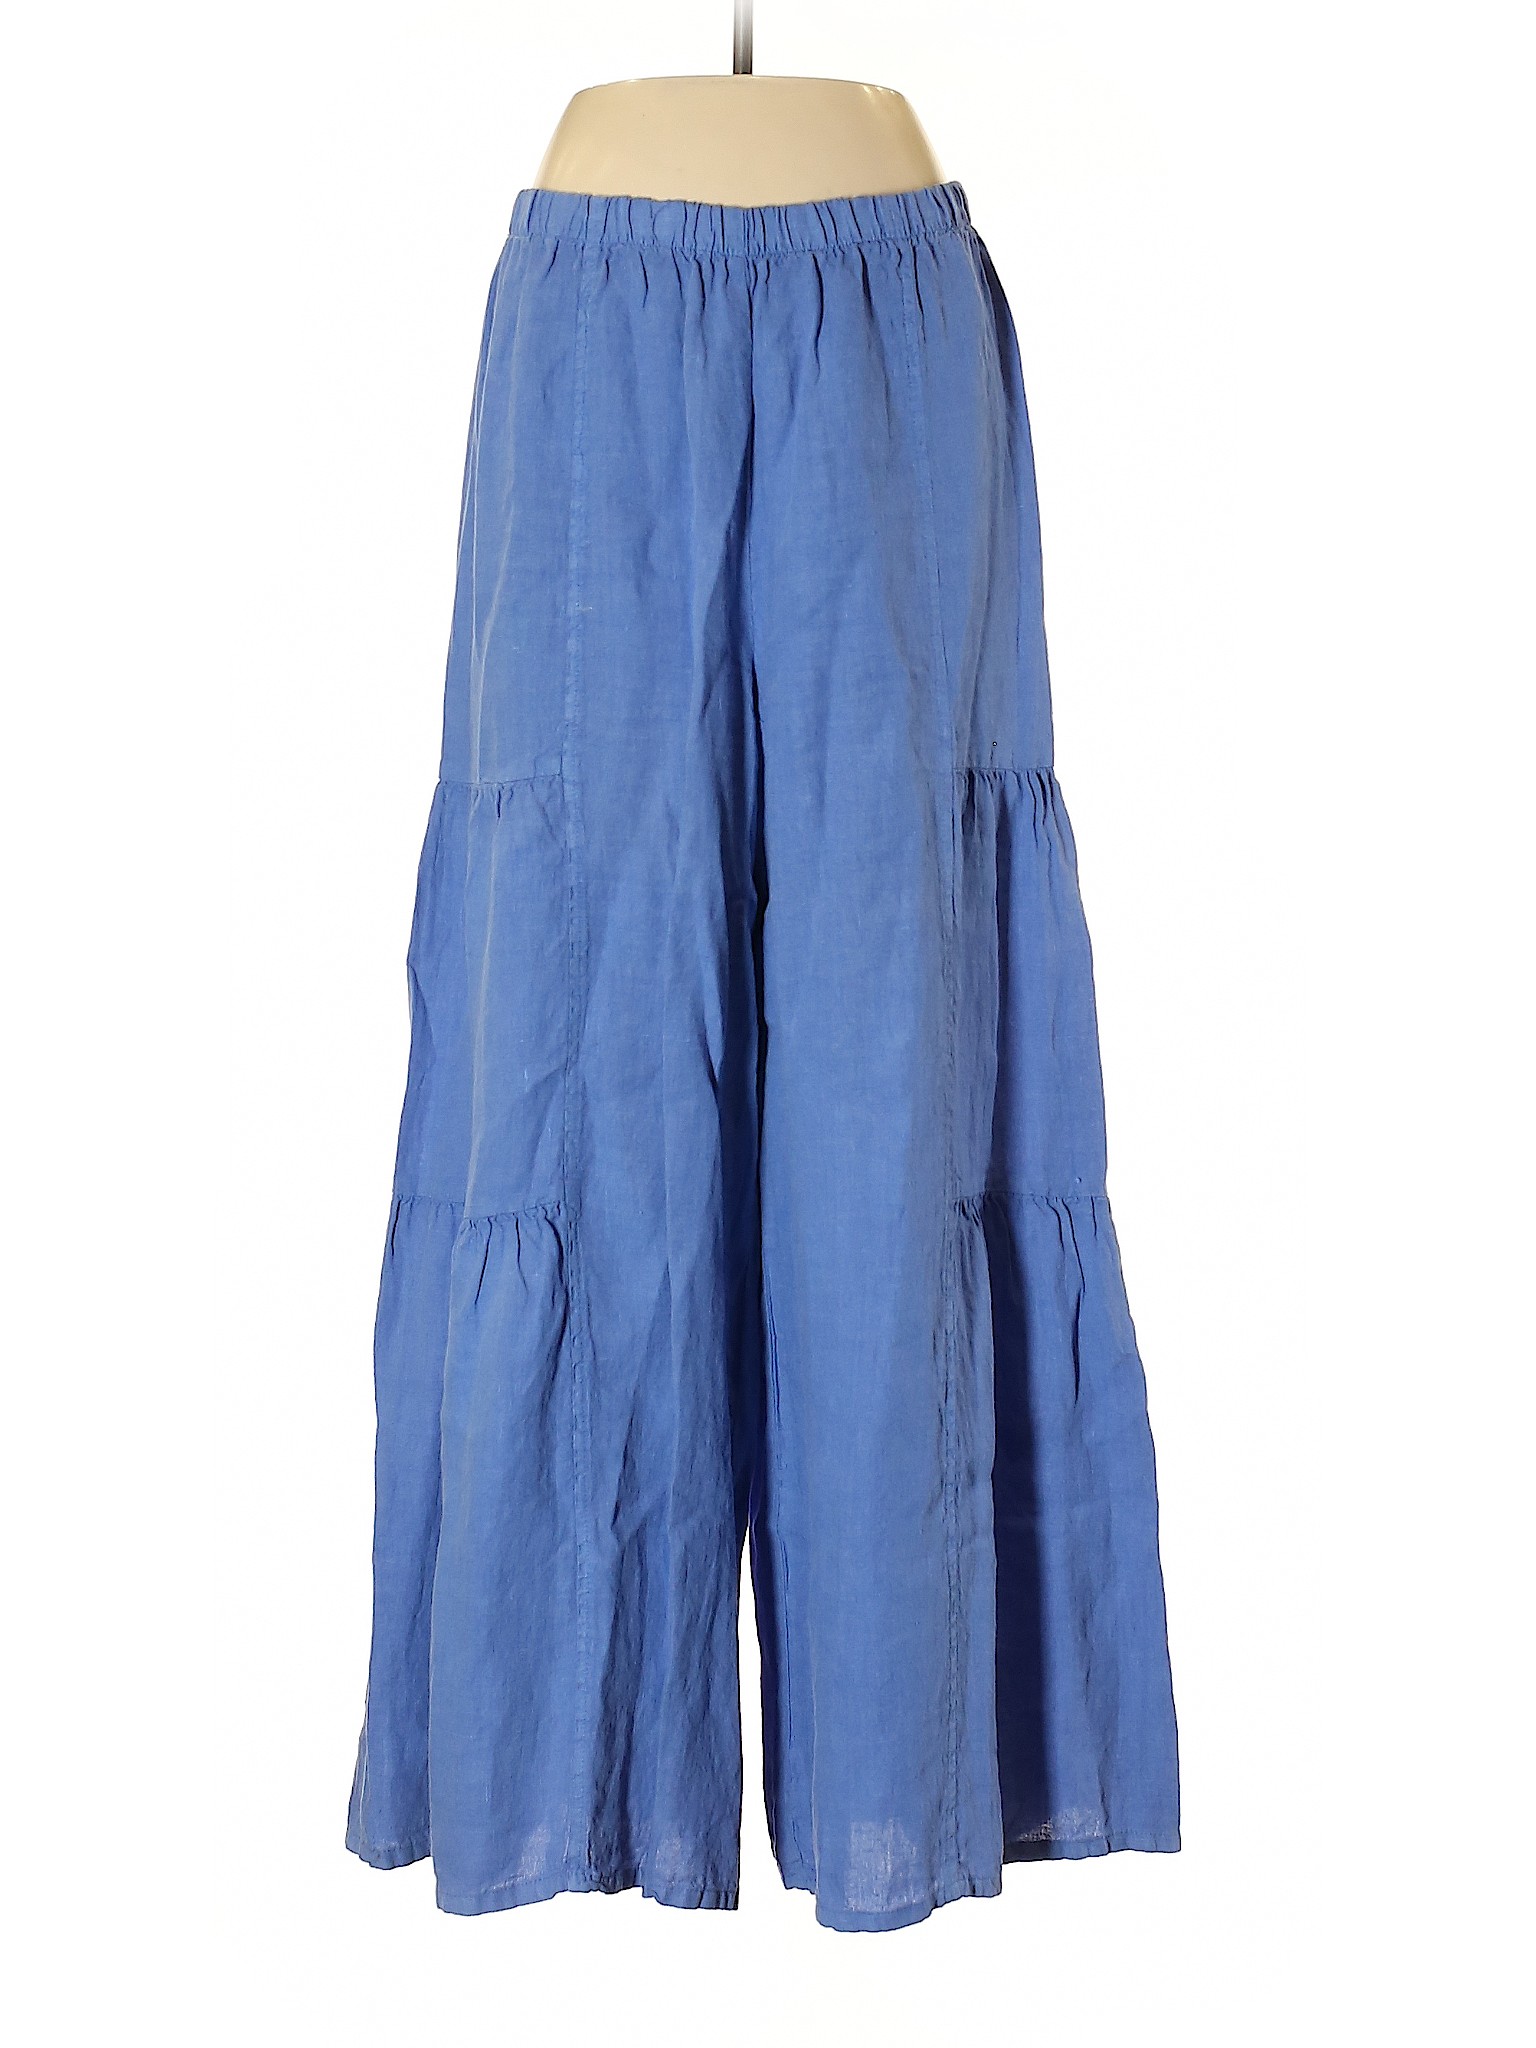 The Territory Ahead 100% Linen Solid Blue Linen Pants Size M - 76% off ...